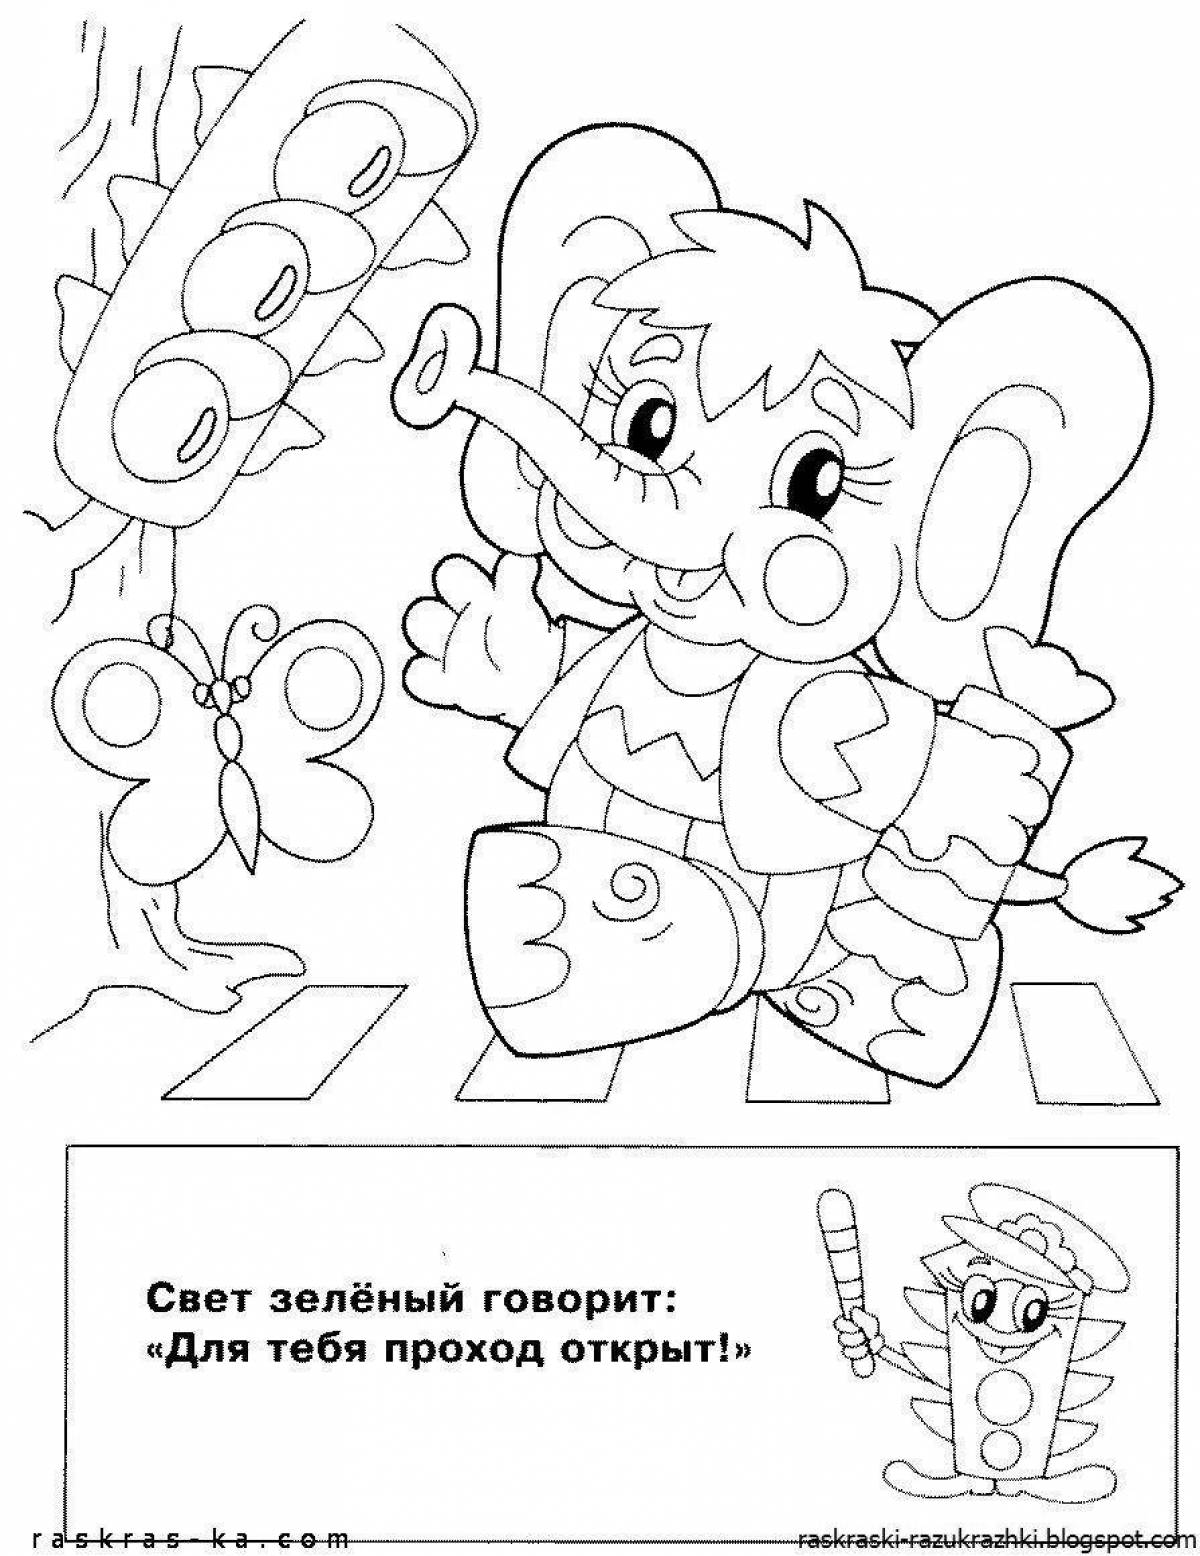 Coloring page with safety letters for kids